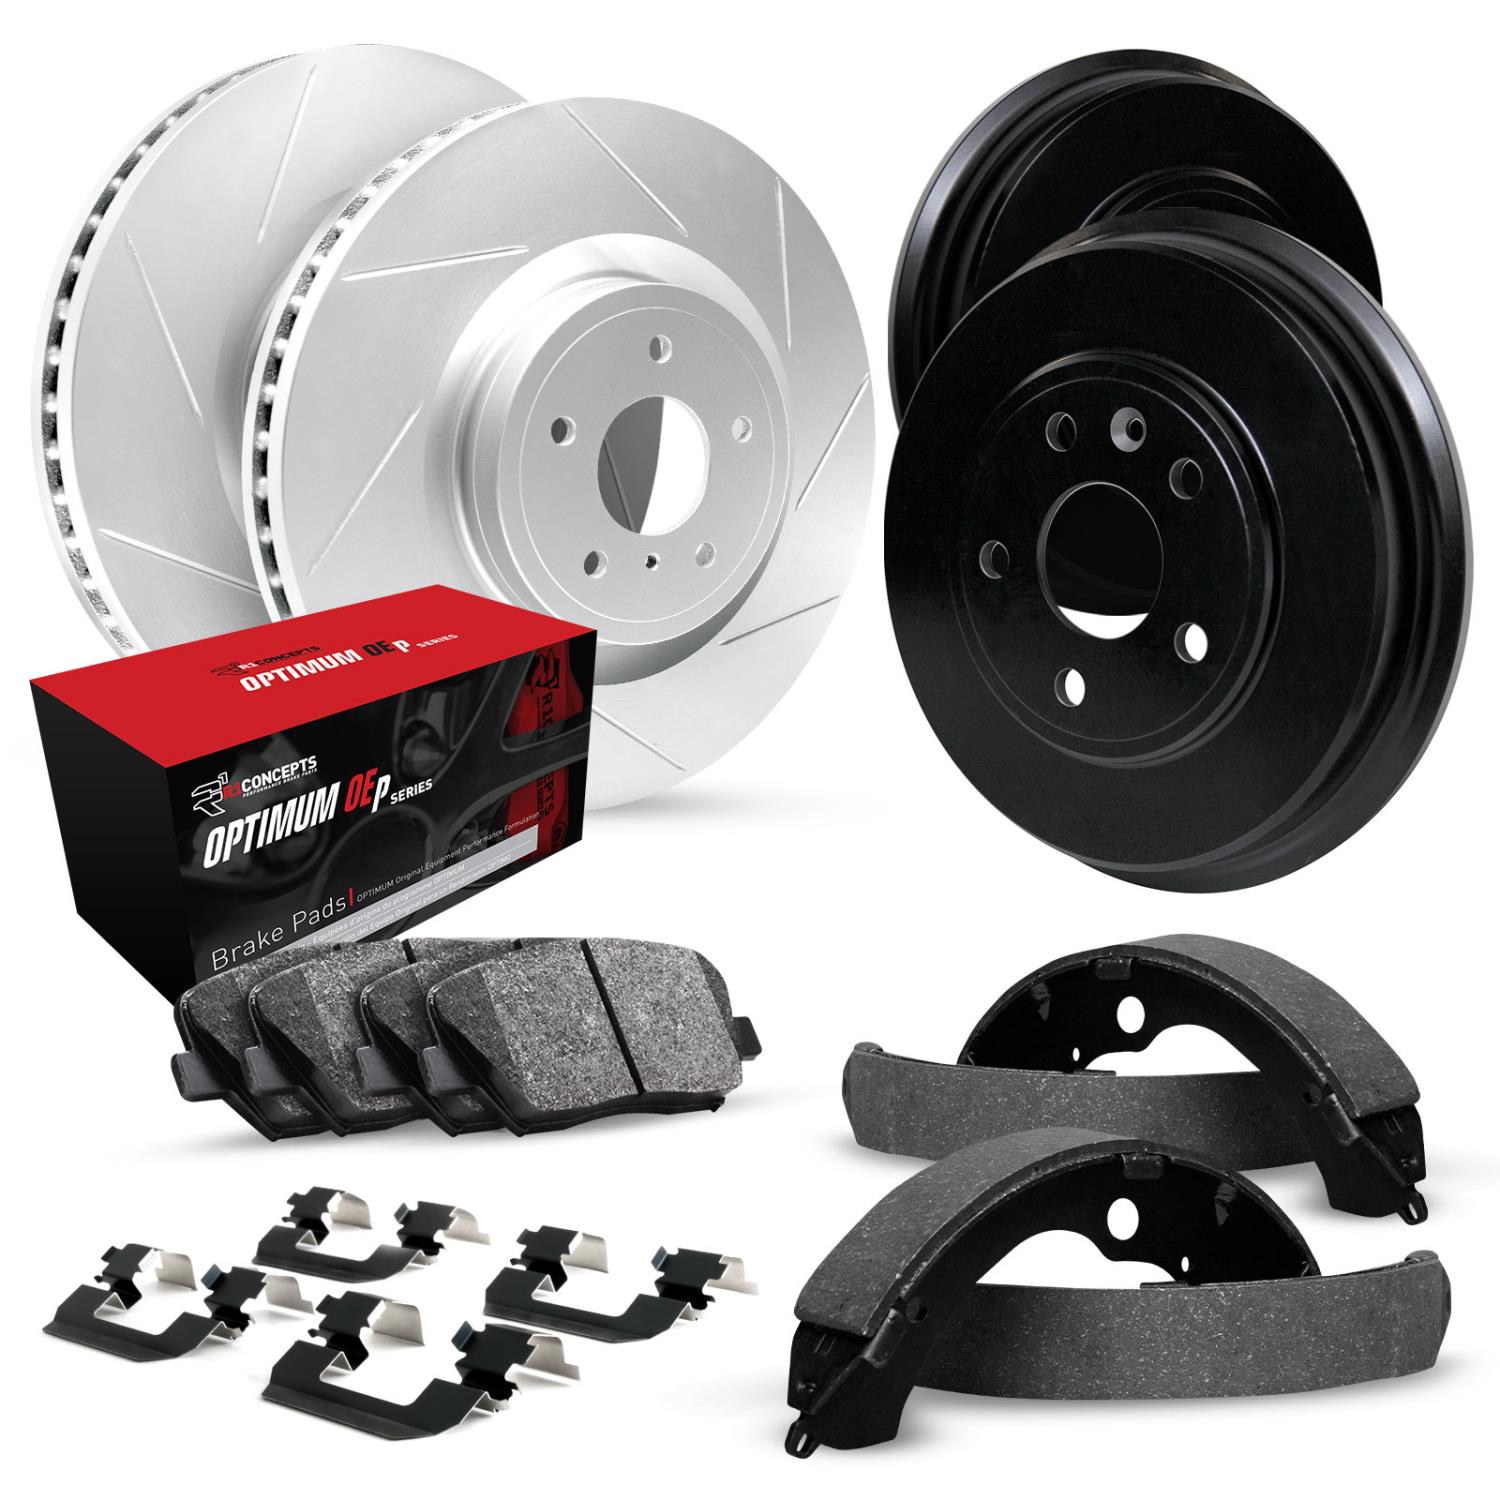 GEO-Carbon Slotted Brake Rotor & Drum Set w/Optimum OE Pads, Shoes, & Hardware, 1975-1985 Ford/Lincoln/Mercury/Mazda